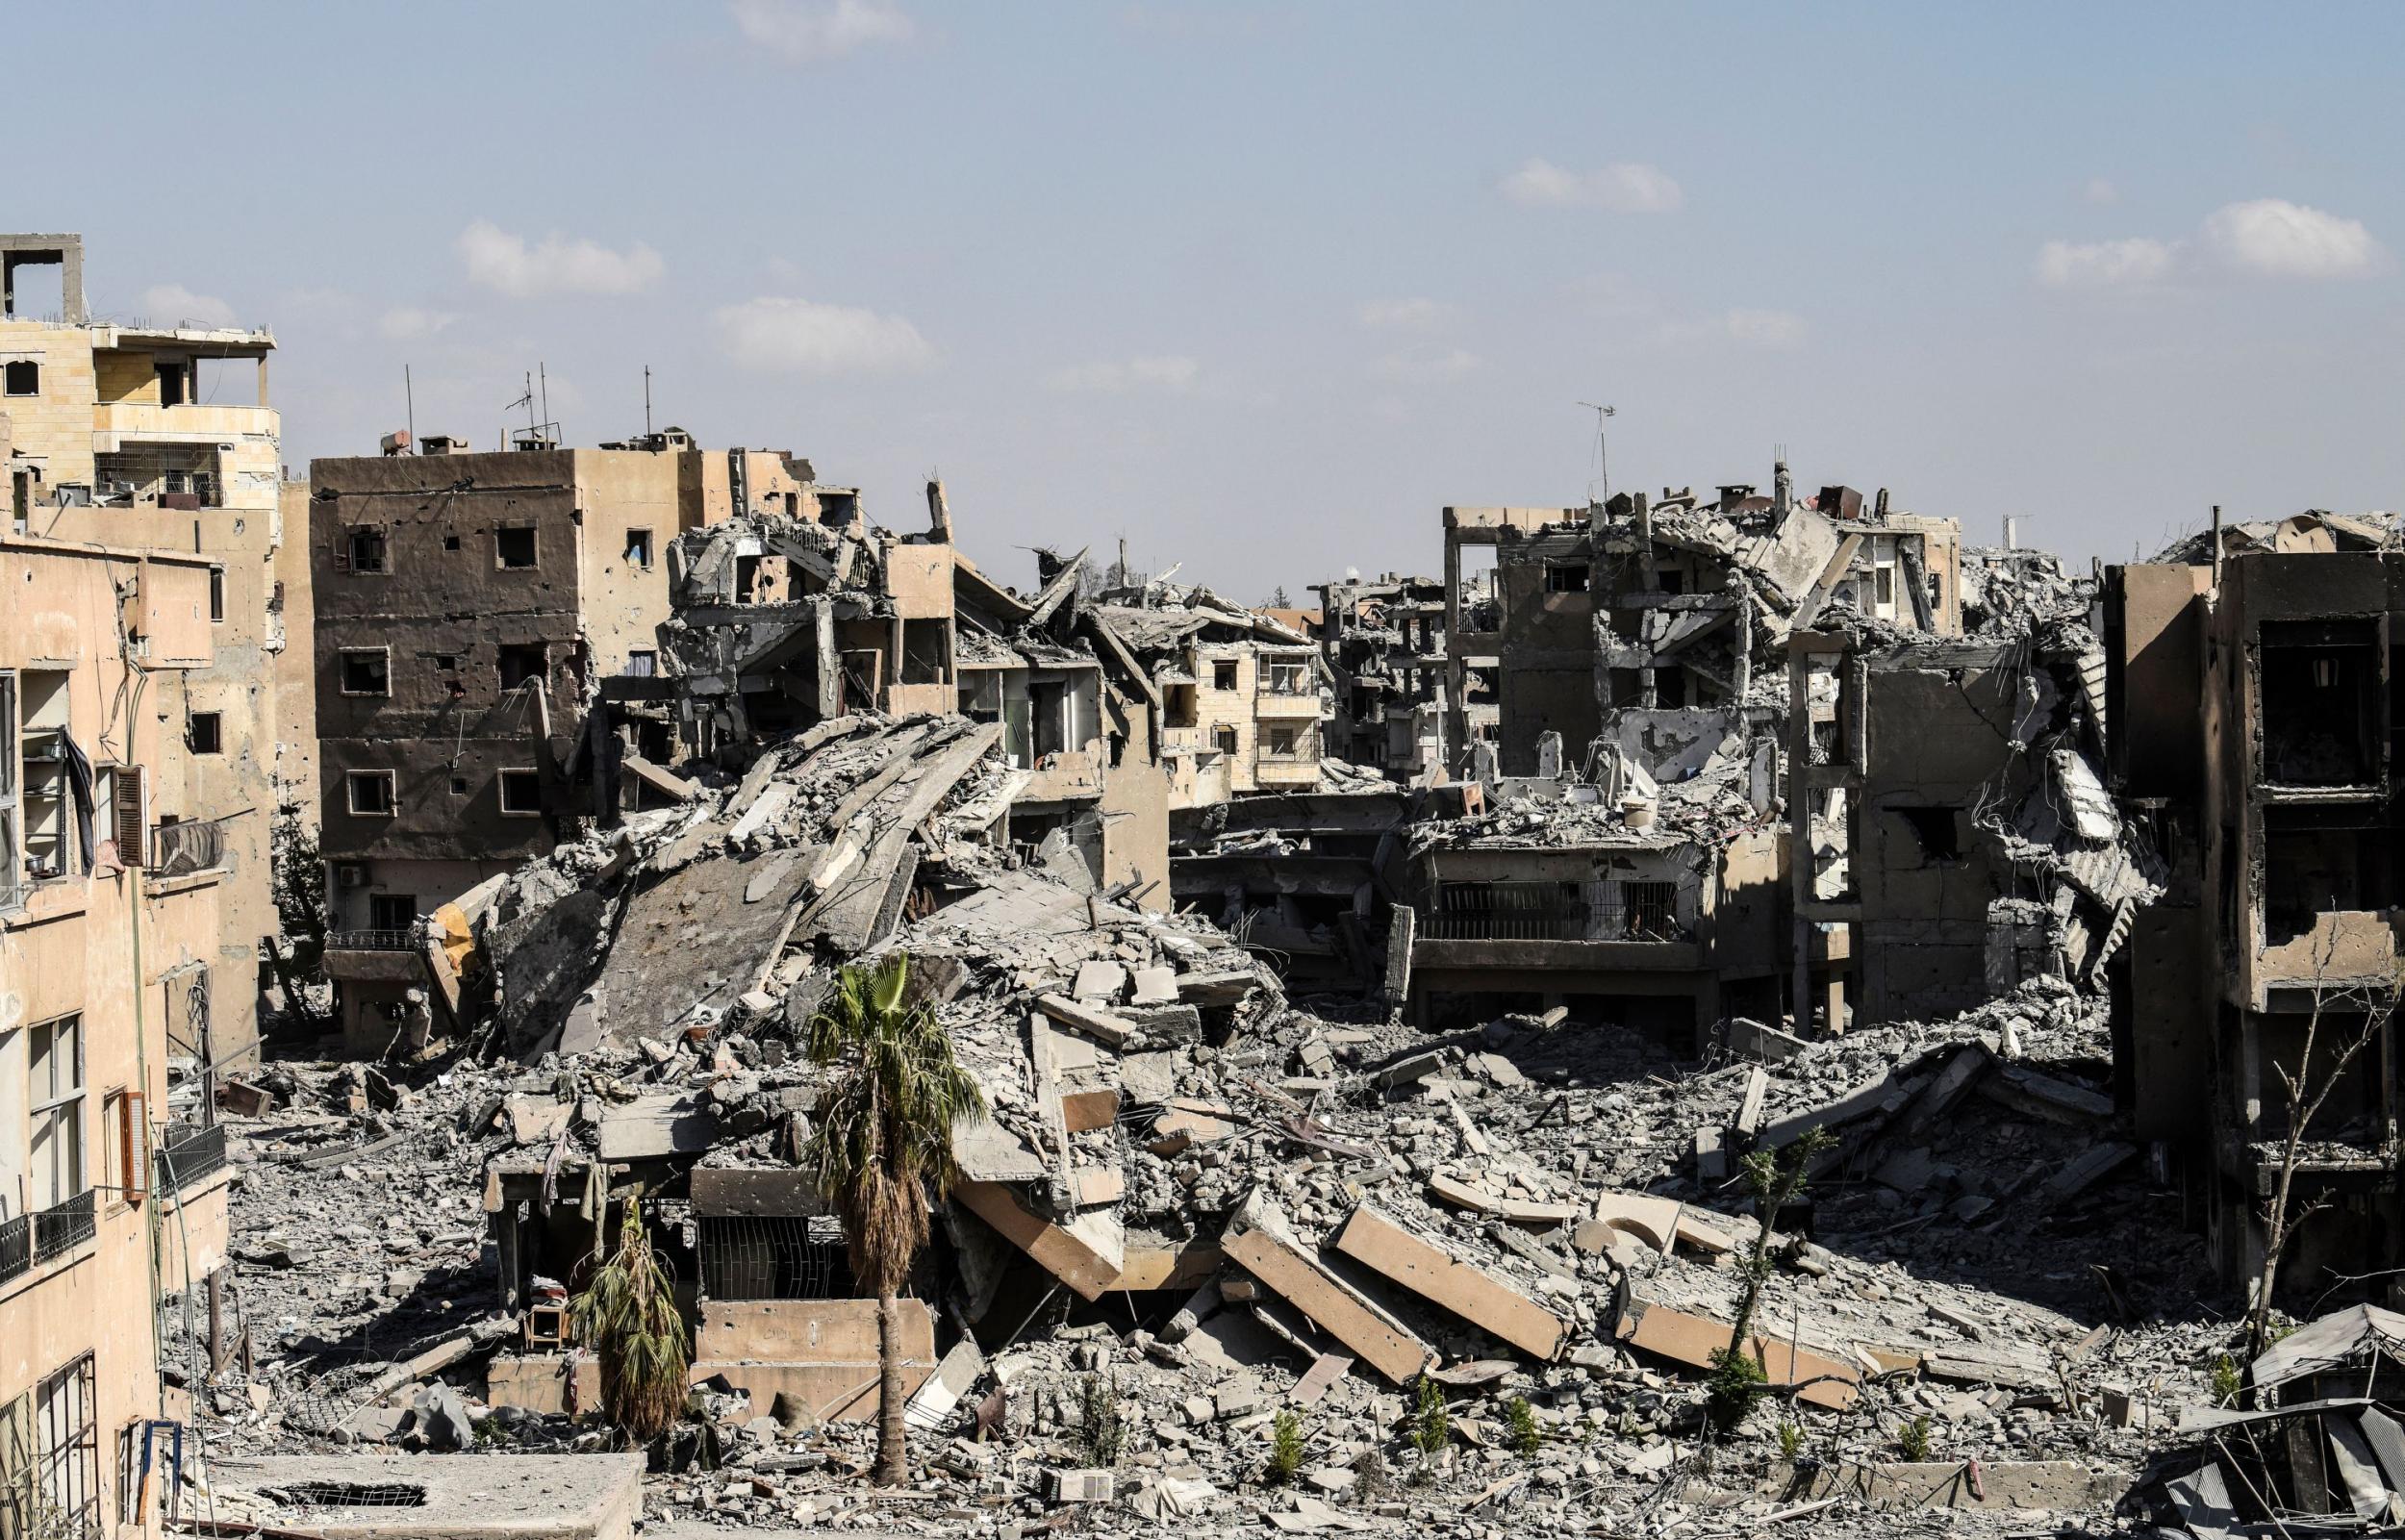 Destruction near Raqqa's central hospital, one of the last Isis-controlled buildings in the city, photographed on 1 October 2017